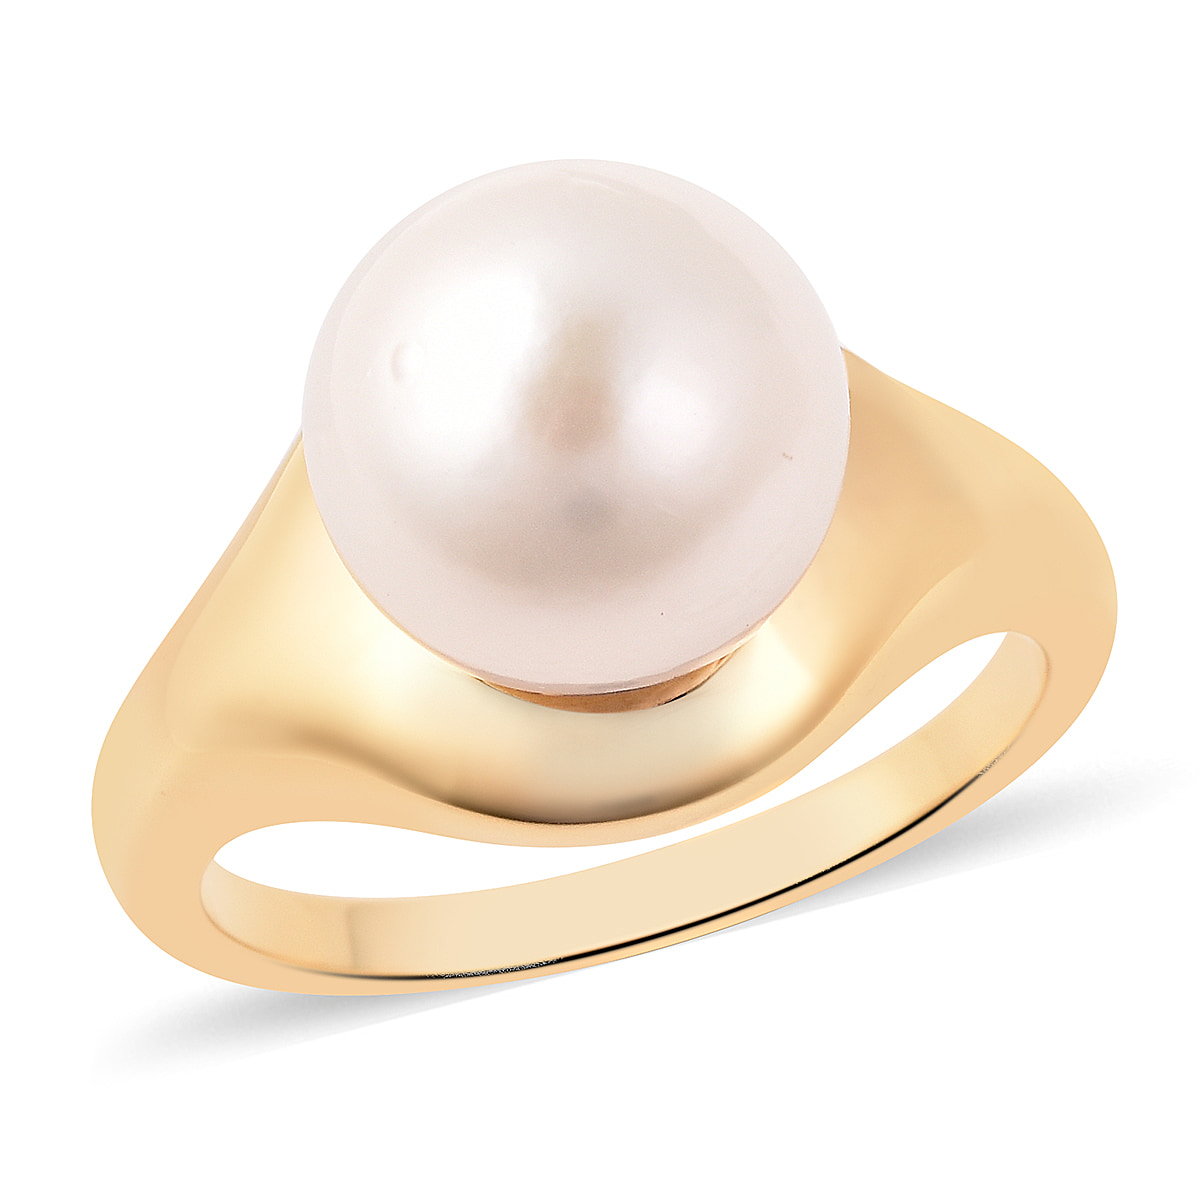 Edison Pearl Ring in Yellow Gold Overlay Sterling Silver